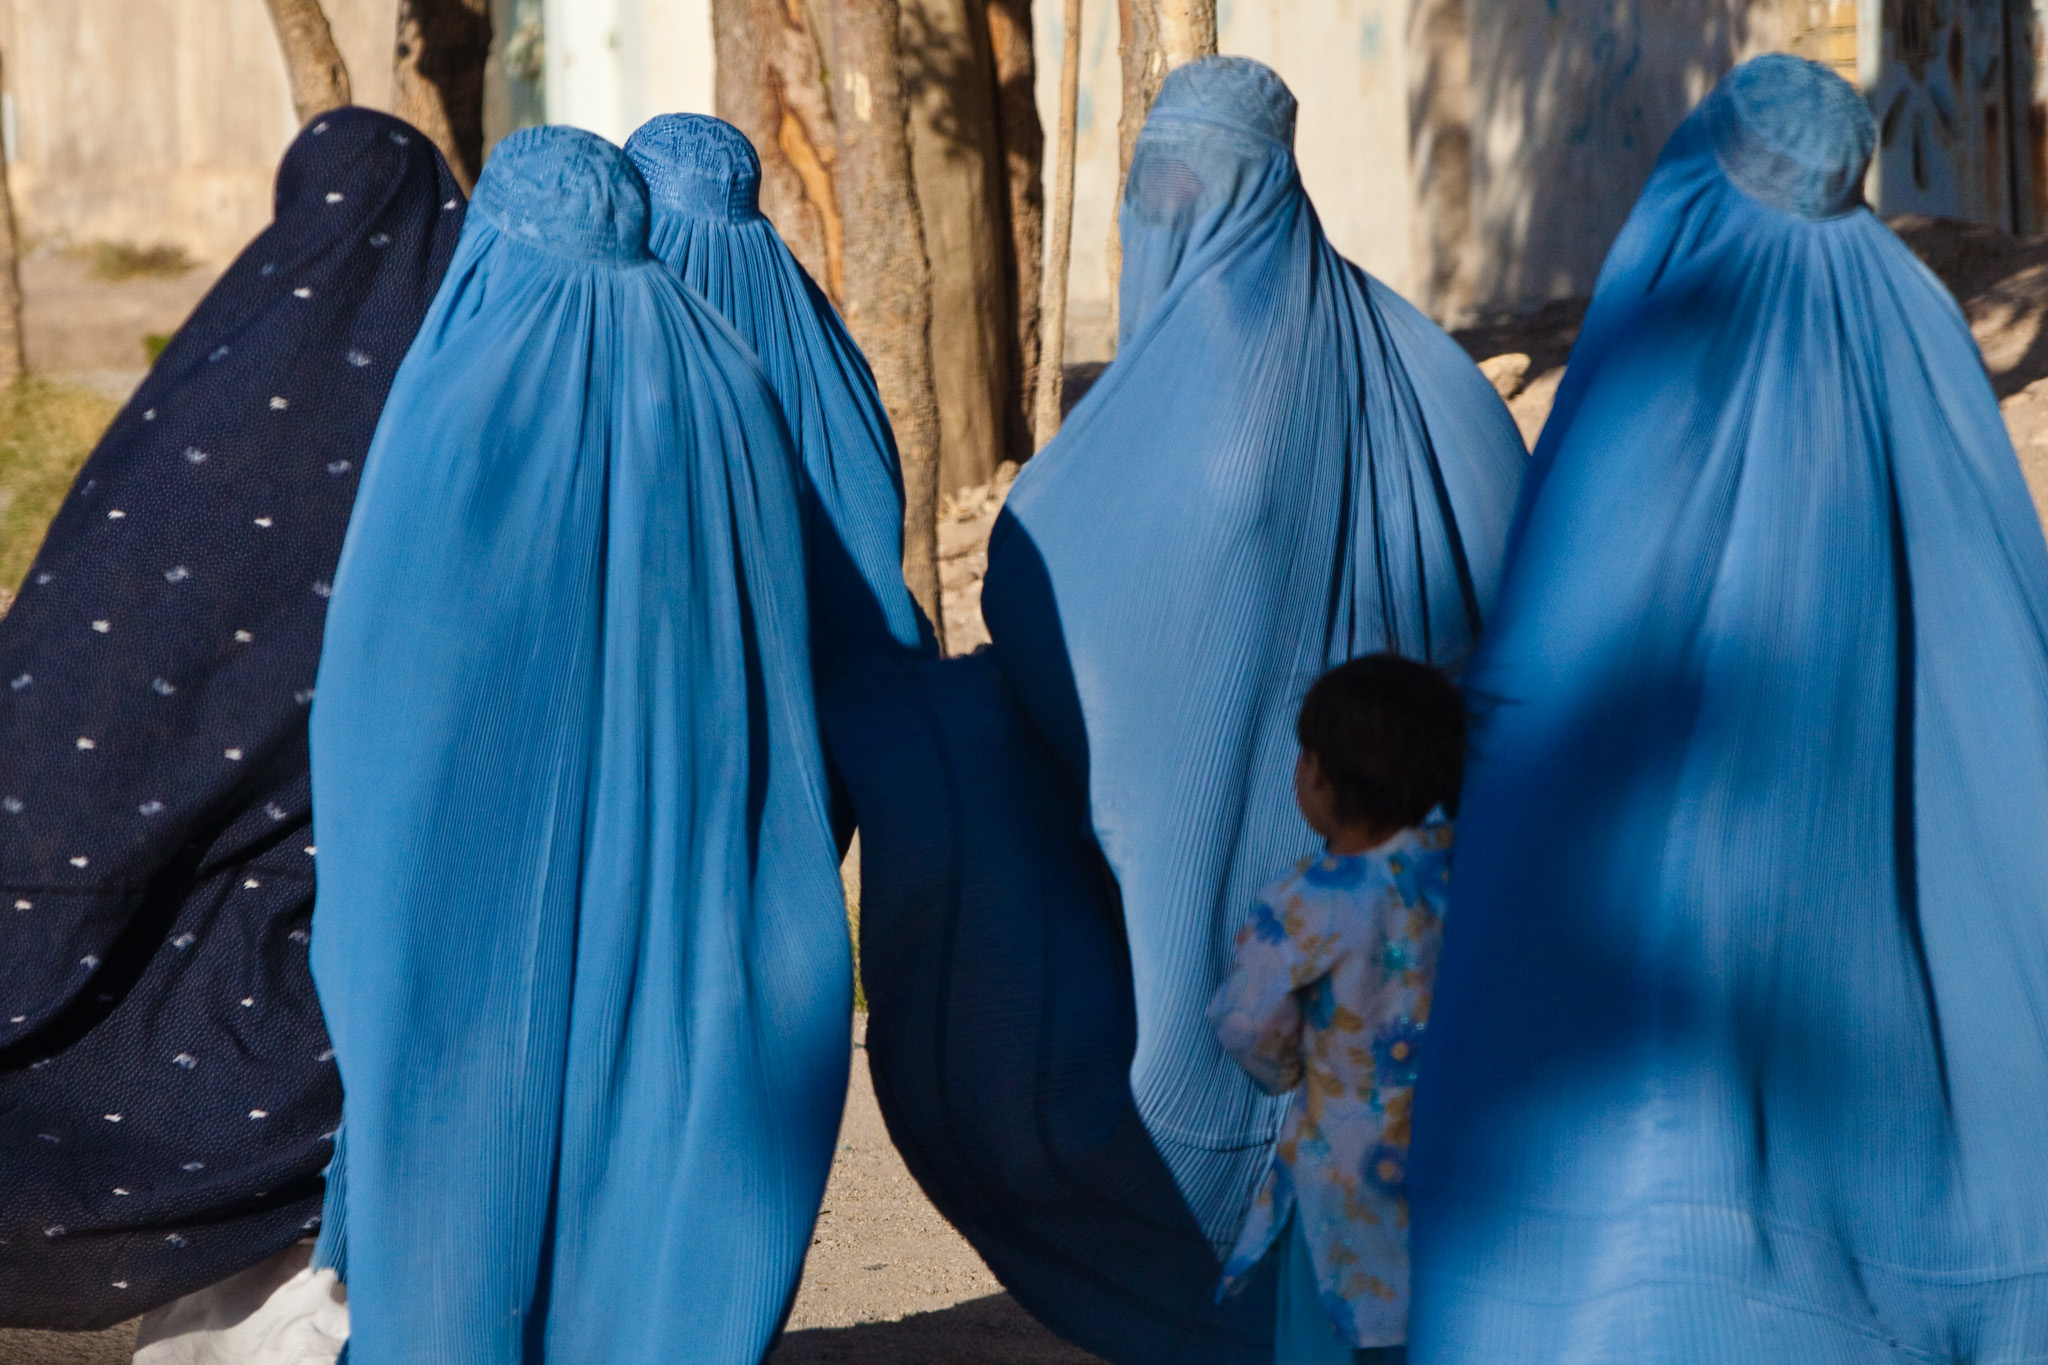 Woman and Children, Herat, Afghanistan